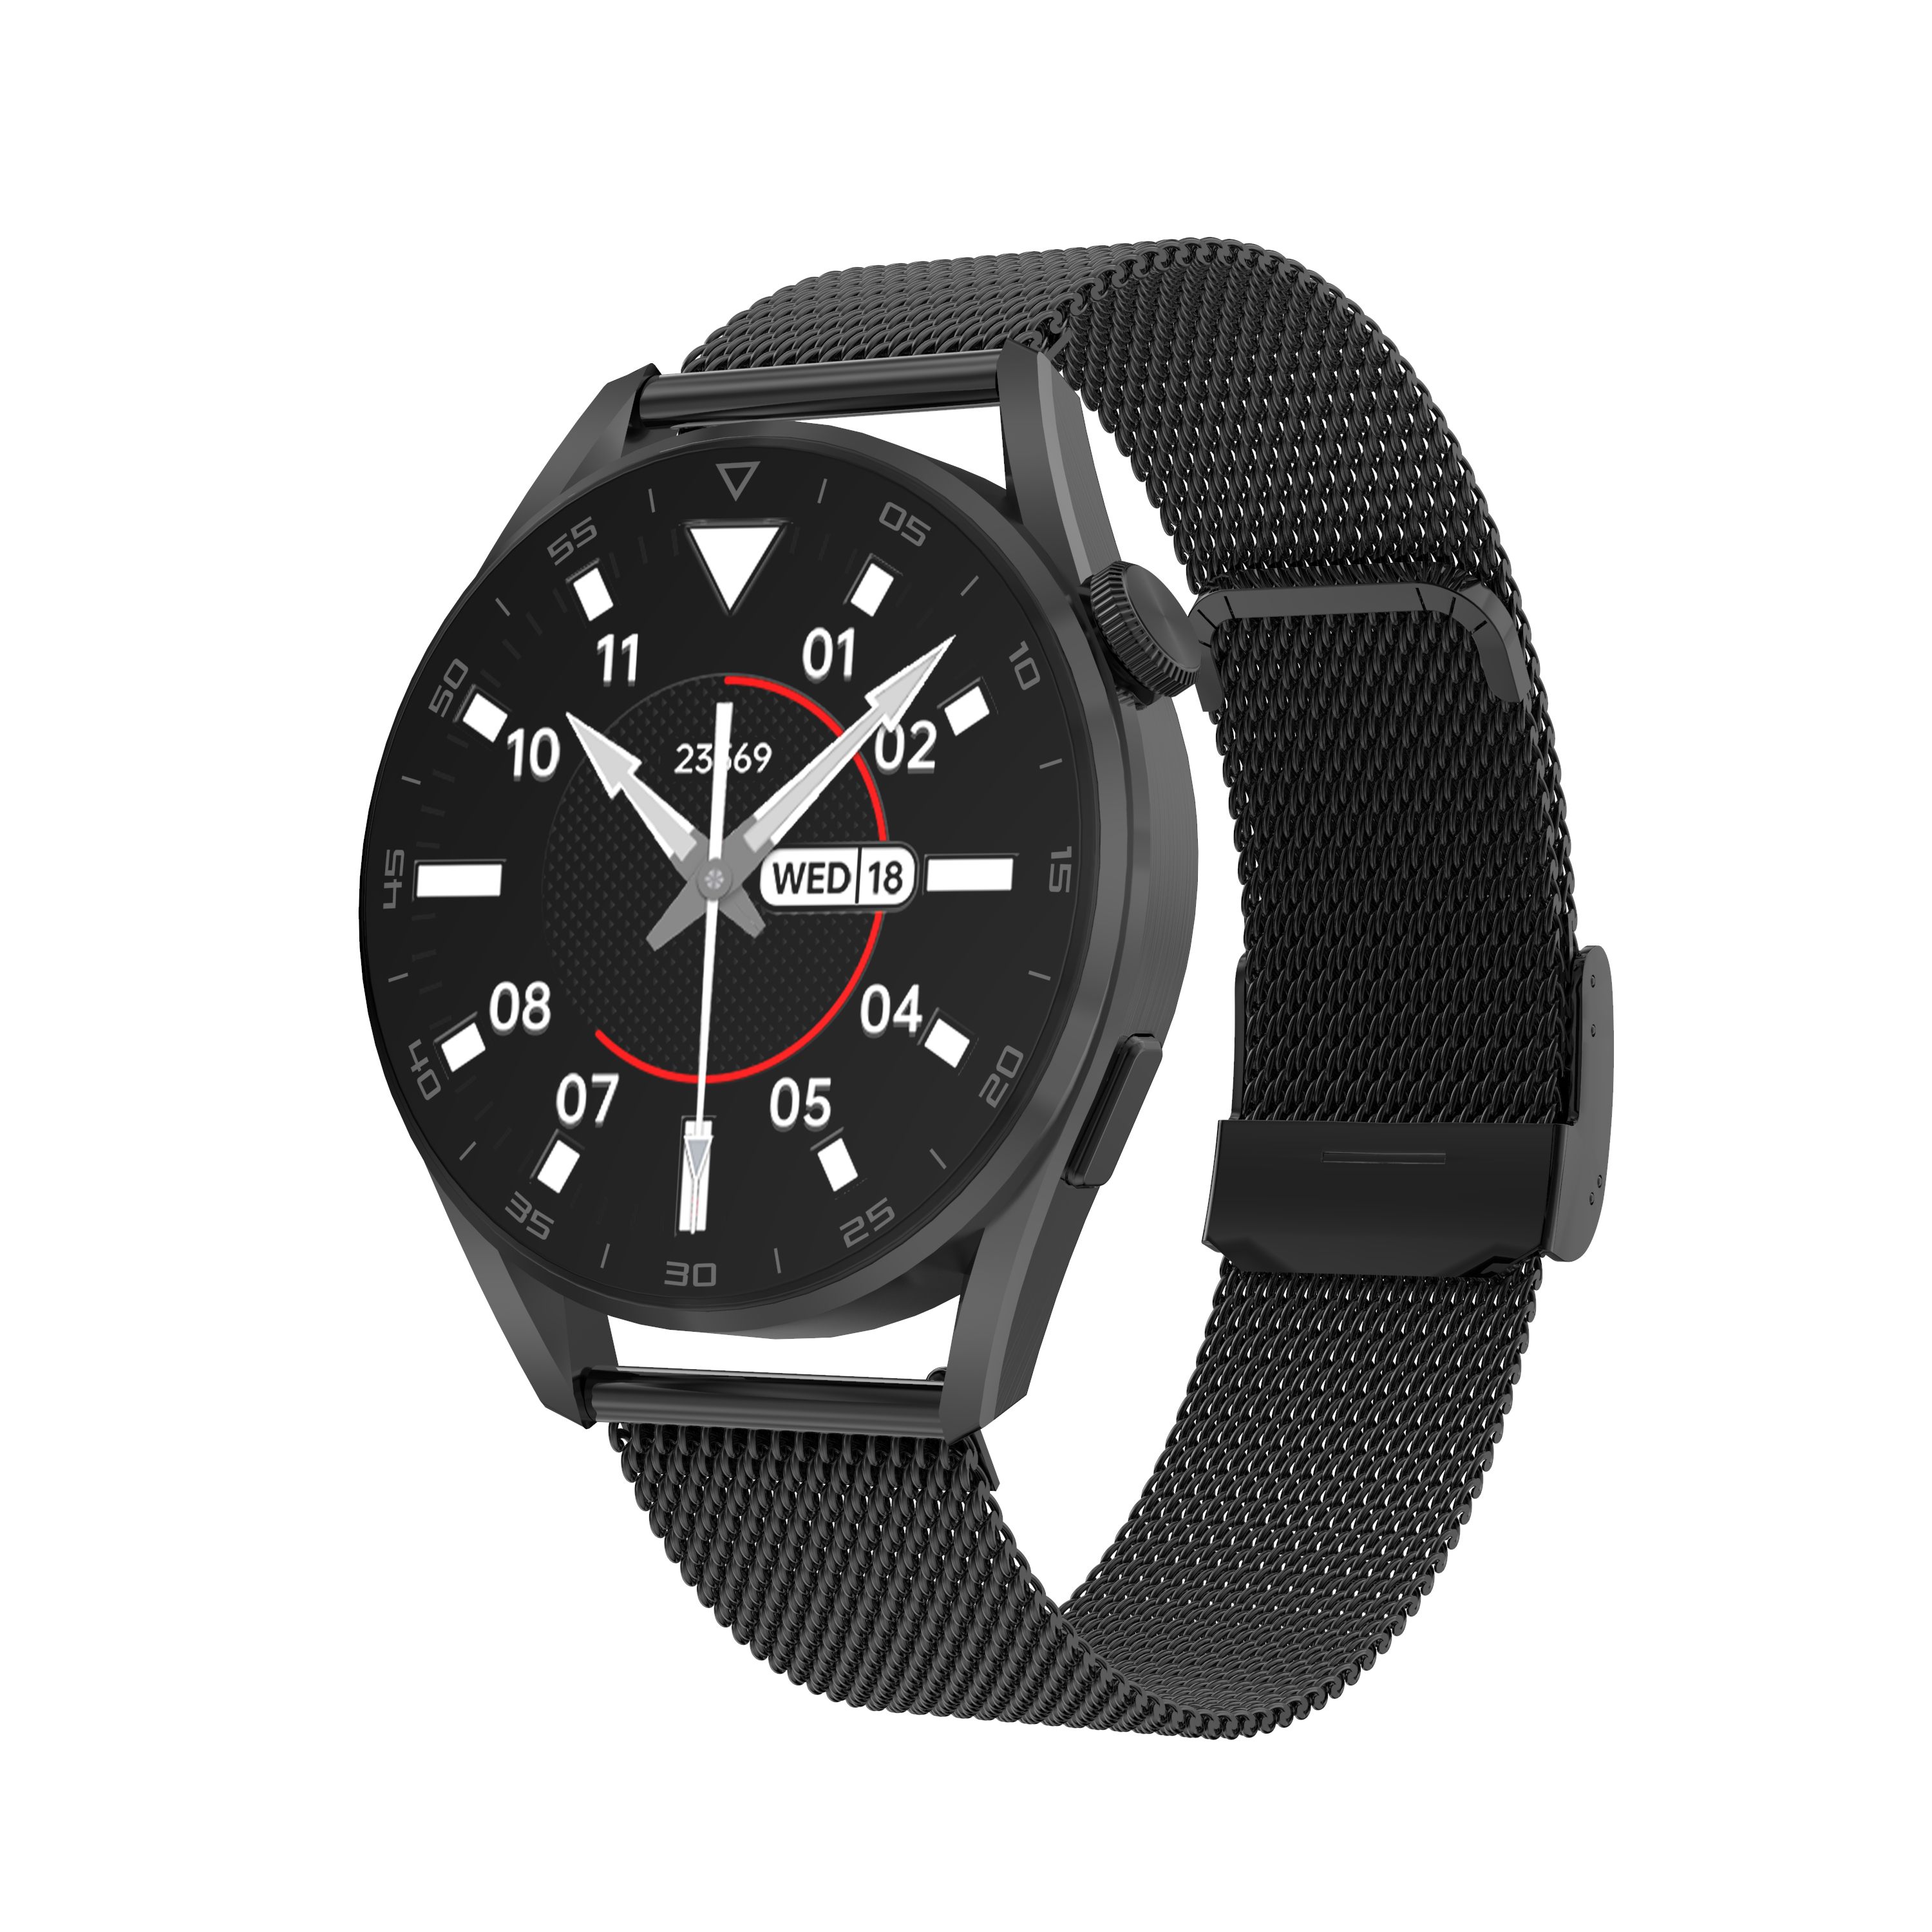 Find DT NO 1 DT3 Pro 1 36 inch 390 390 Pixels IPS Full Round Touch Screen BT Calling Heart Rate Monitor 100 Watch Faces IP68 Waterproof BT 5 0 Smart Watch for Sale on Gipsybee.com with cryptocurrencies